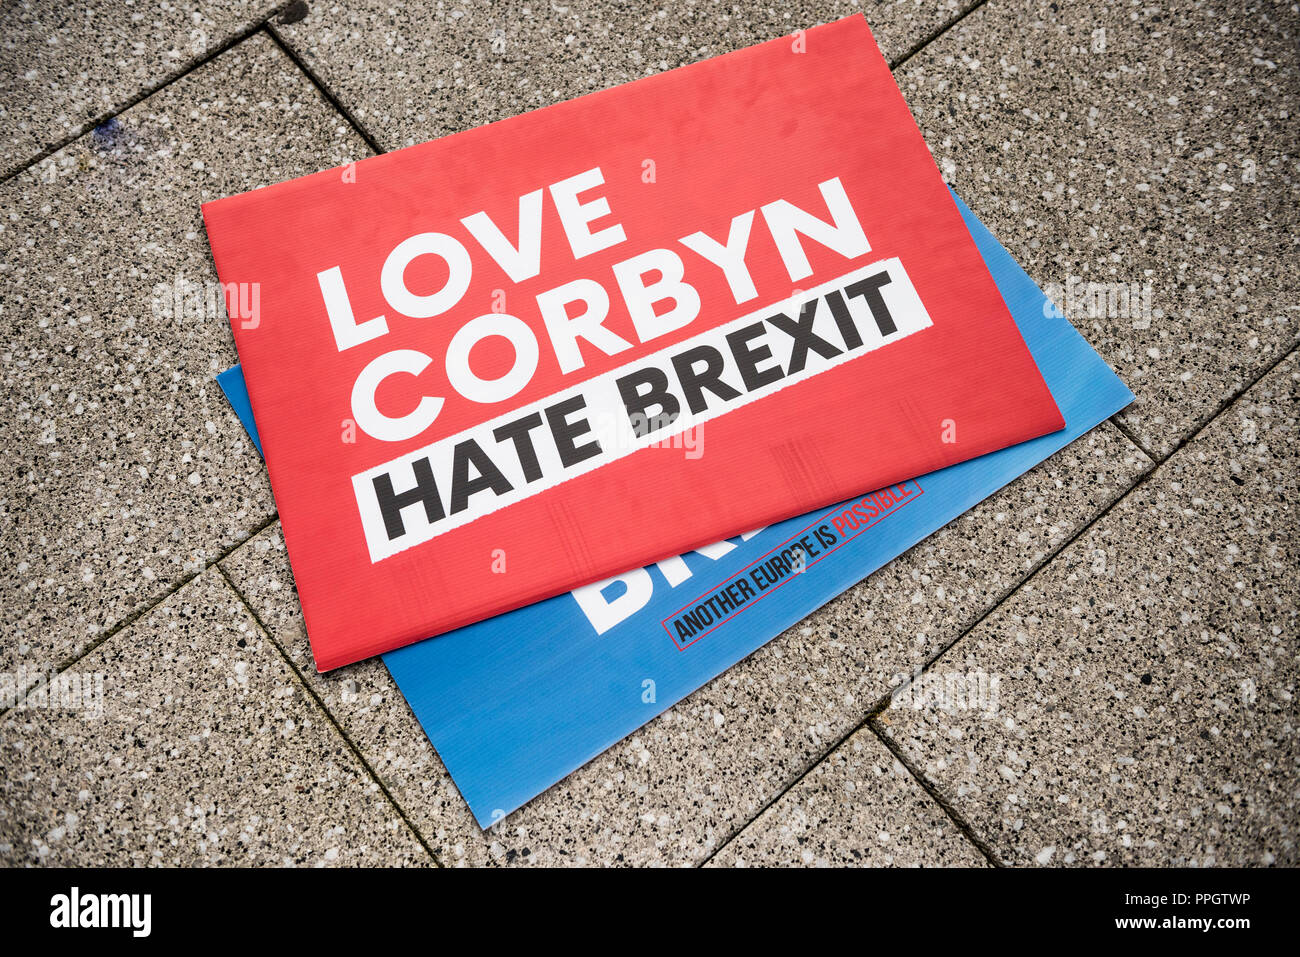 Liverpool, England 25 September 2018, Labour Conference, Arenna Conference Centre Albert Docks. Various alternative campaigns and rallies outside of main conference centre. Credit: Rena Pearl/Alamy Live News Stock Photo